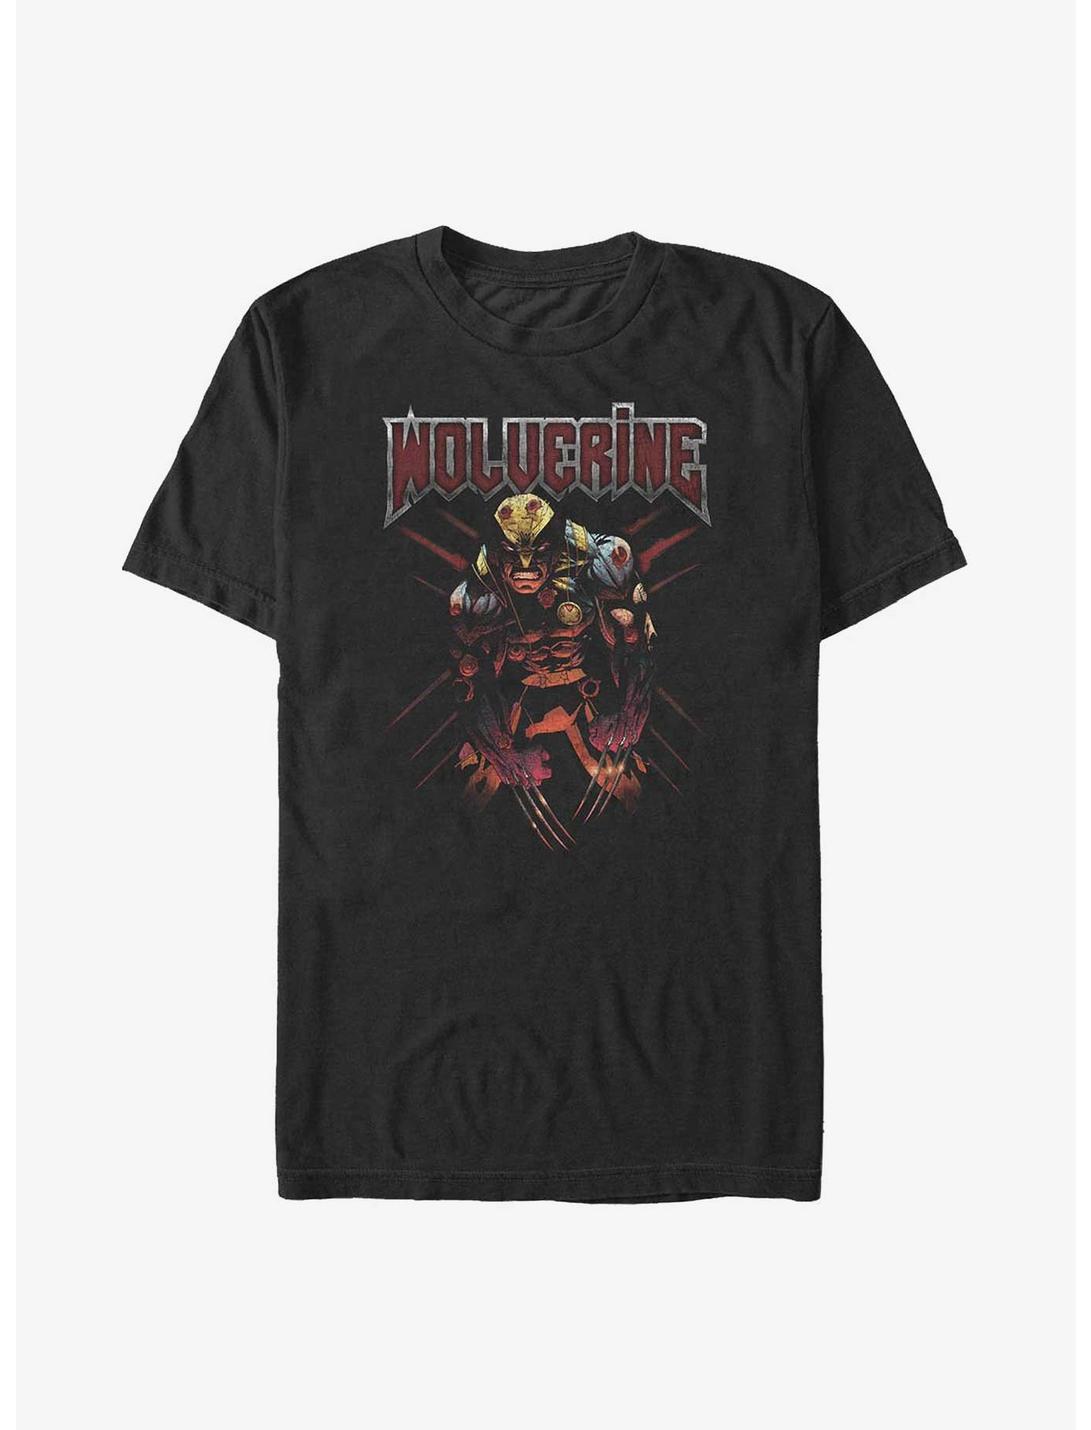 Wolverine Claws Out Unbeaten Big & Tall T-Shirt, BLACK, hi-res